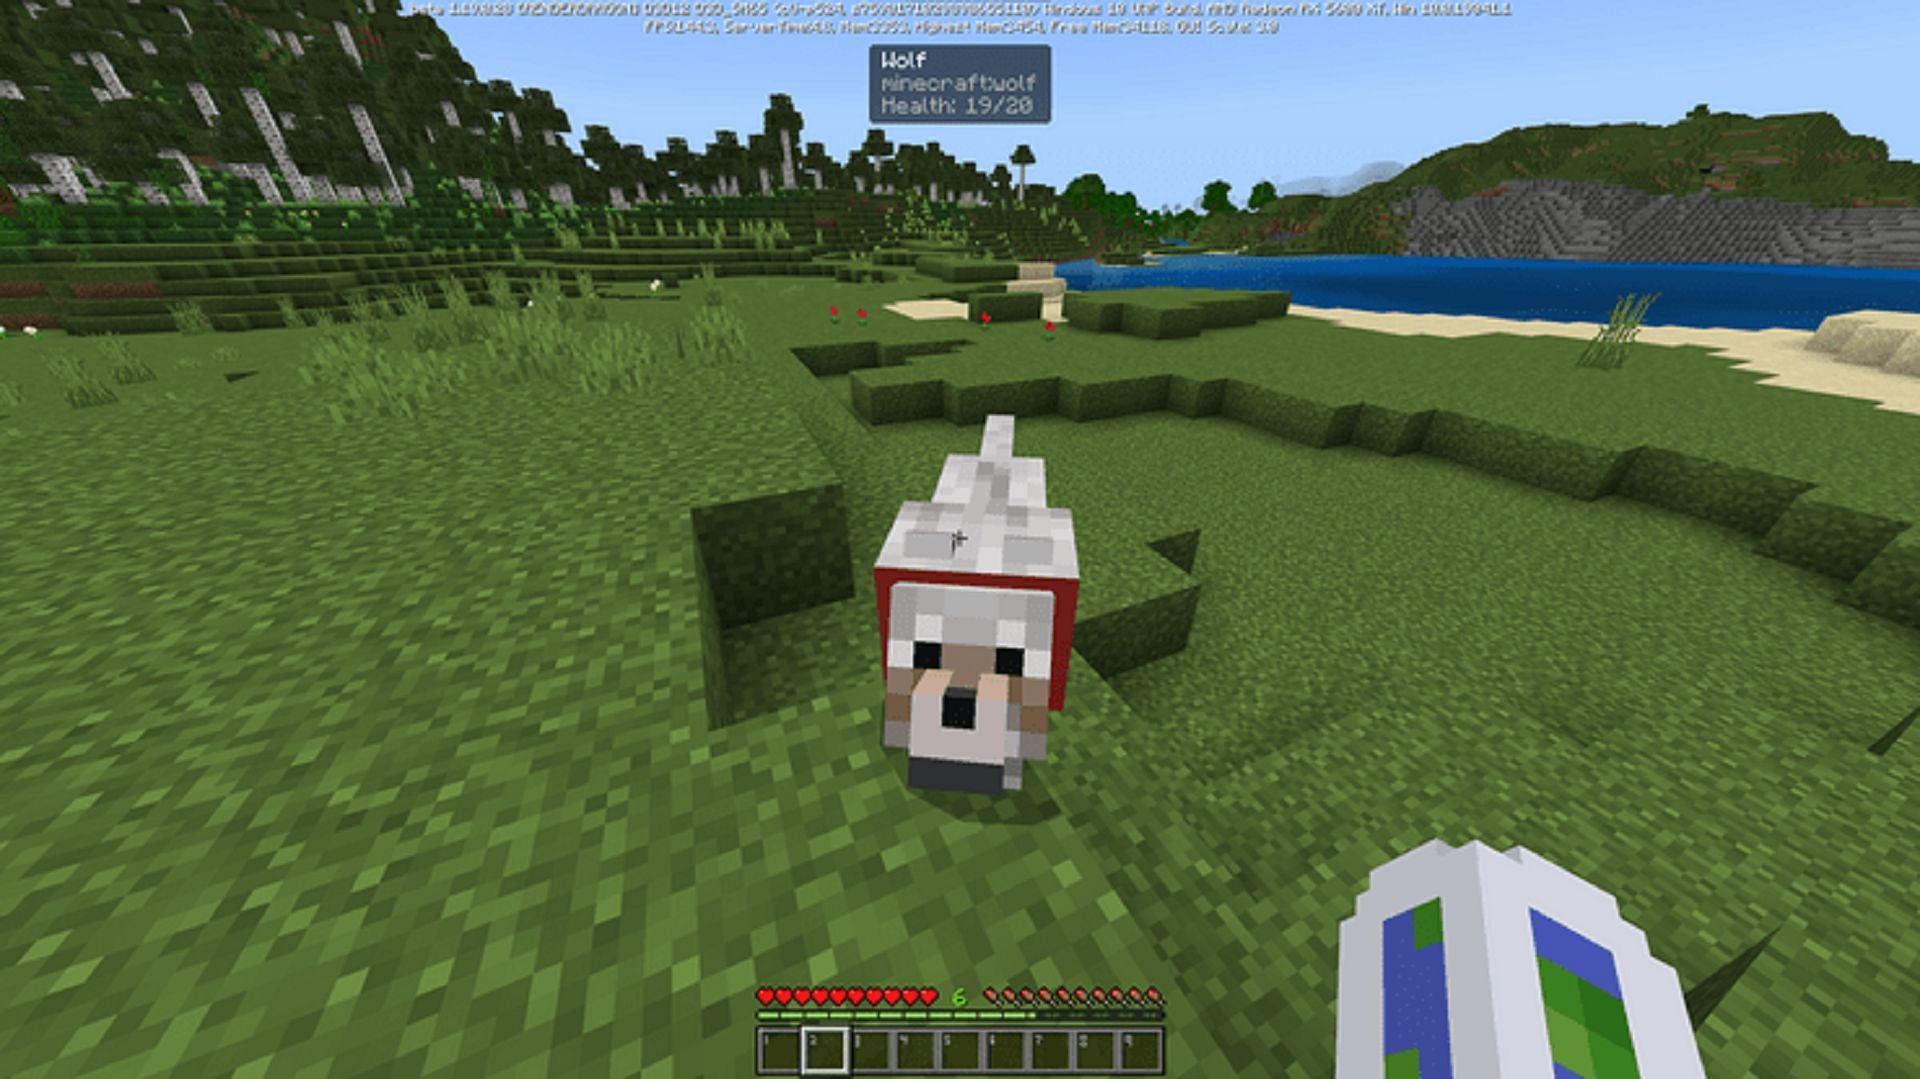 This plugin provides tooltips, which is great for new players (Image via Fluffyalien1422/Mcpedl)